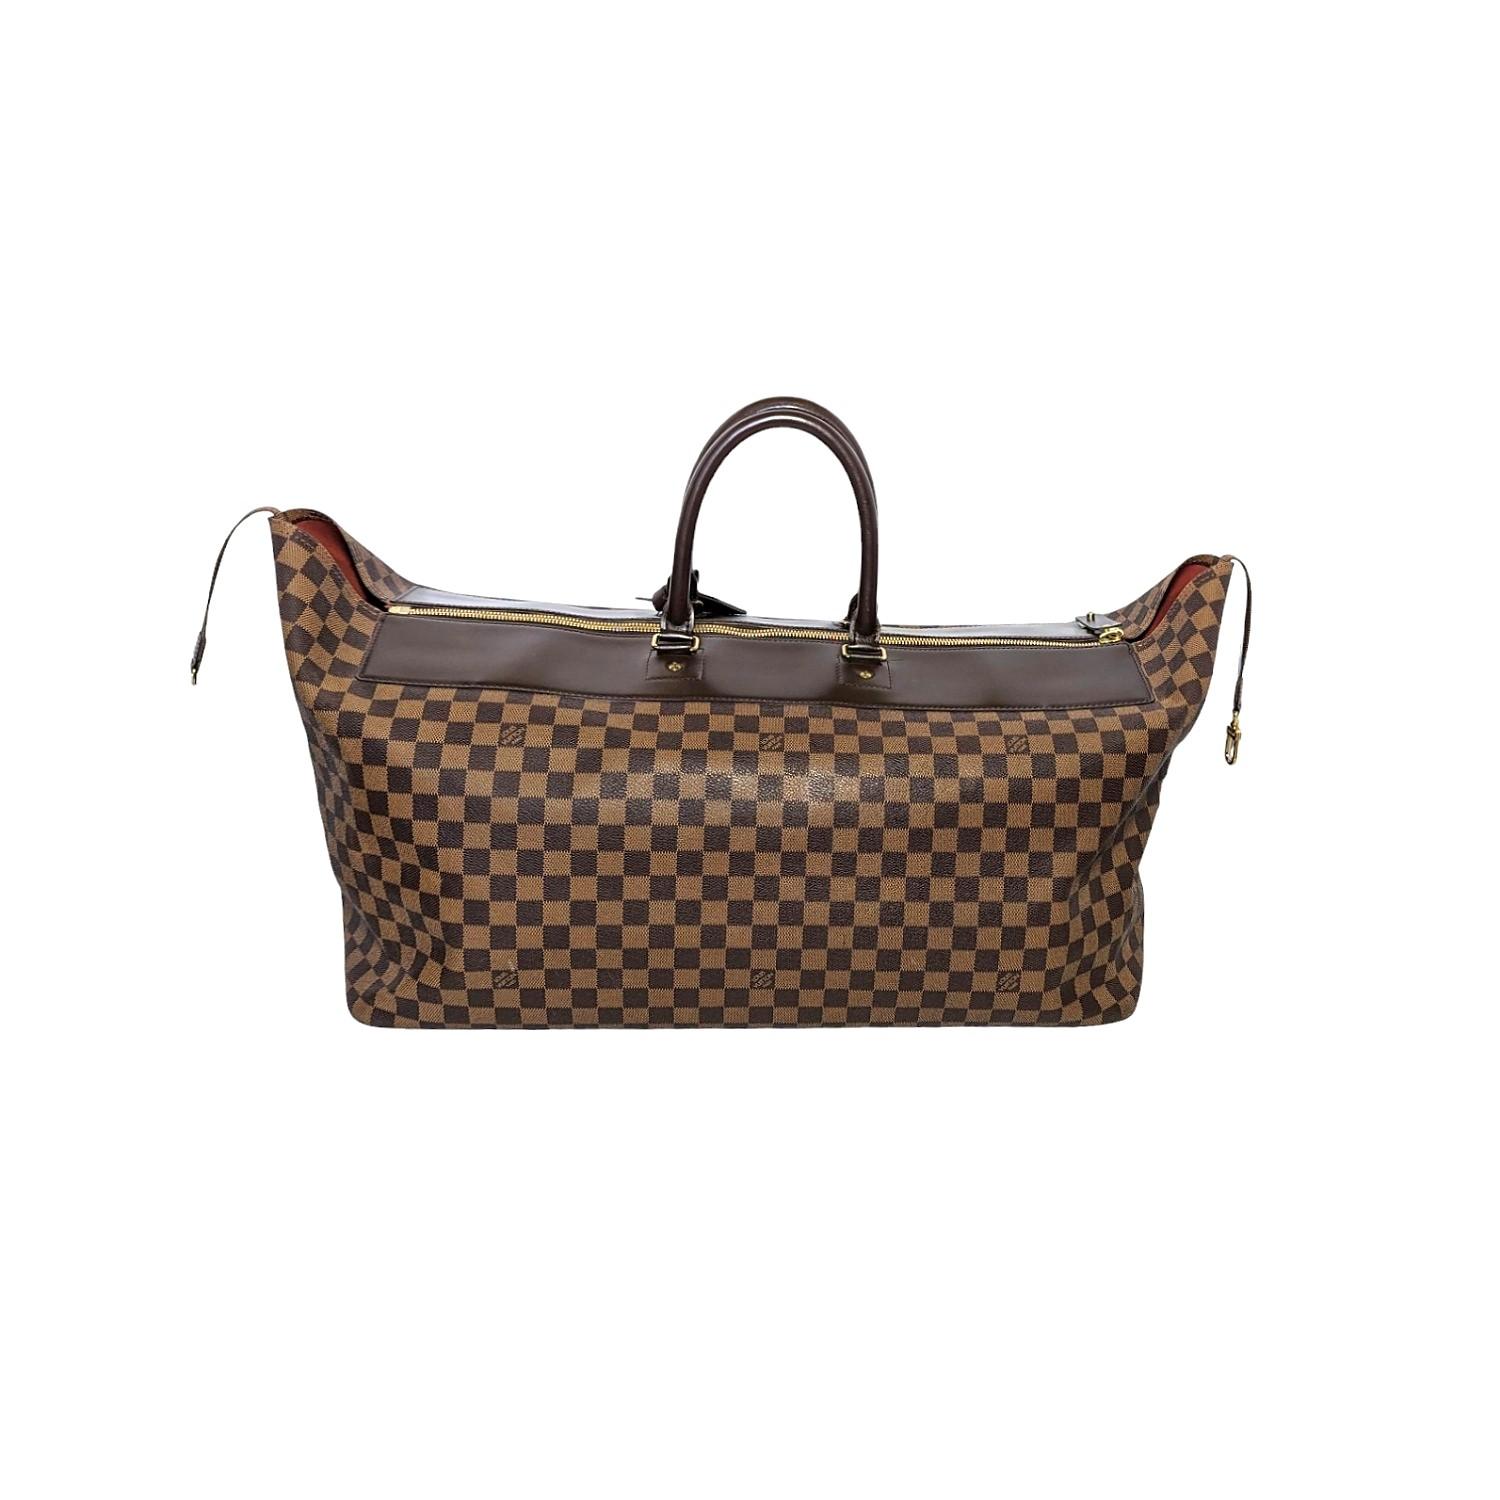 This stylish travel tote is crafted of Louis Vuitton signature Damier coated canvas in brown. The bag features rolled leather top handles, and brass hardware. The top zipper opens to a spacious orange fabric interior with a hanging zipper pocket.